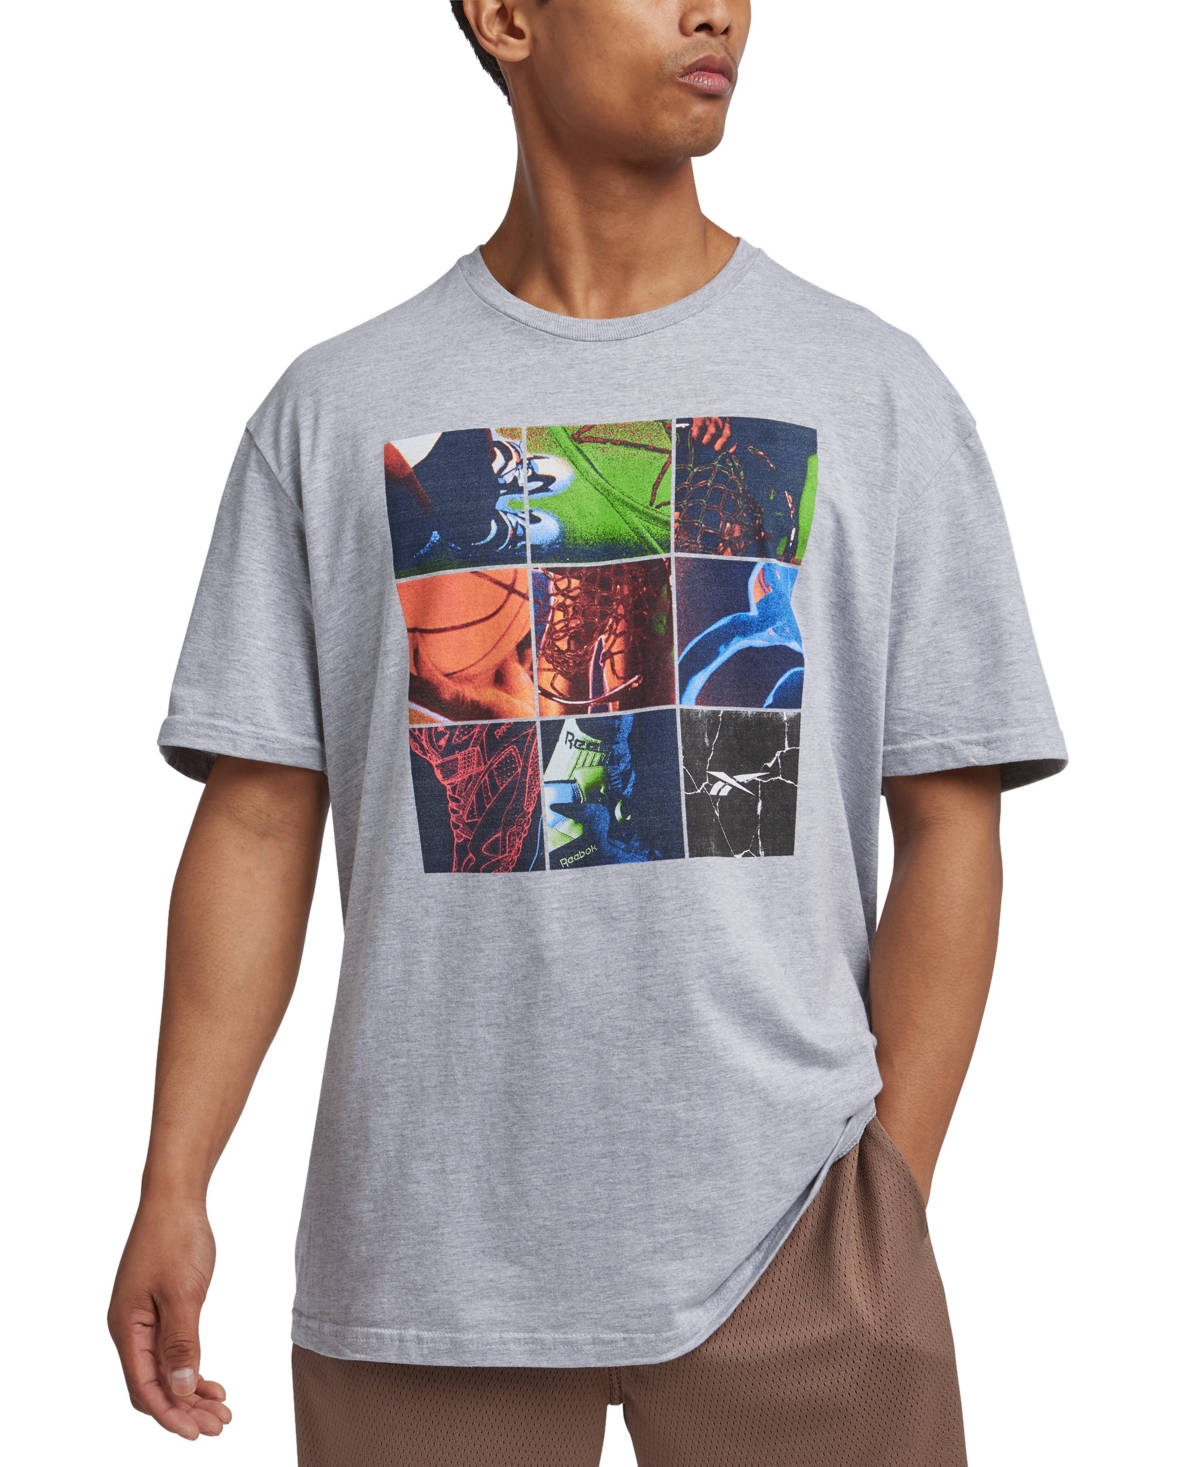 Men's Above The Rim Basketball Collage Graphic T-Shirt - Grey Heather/multi